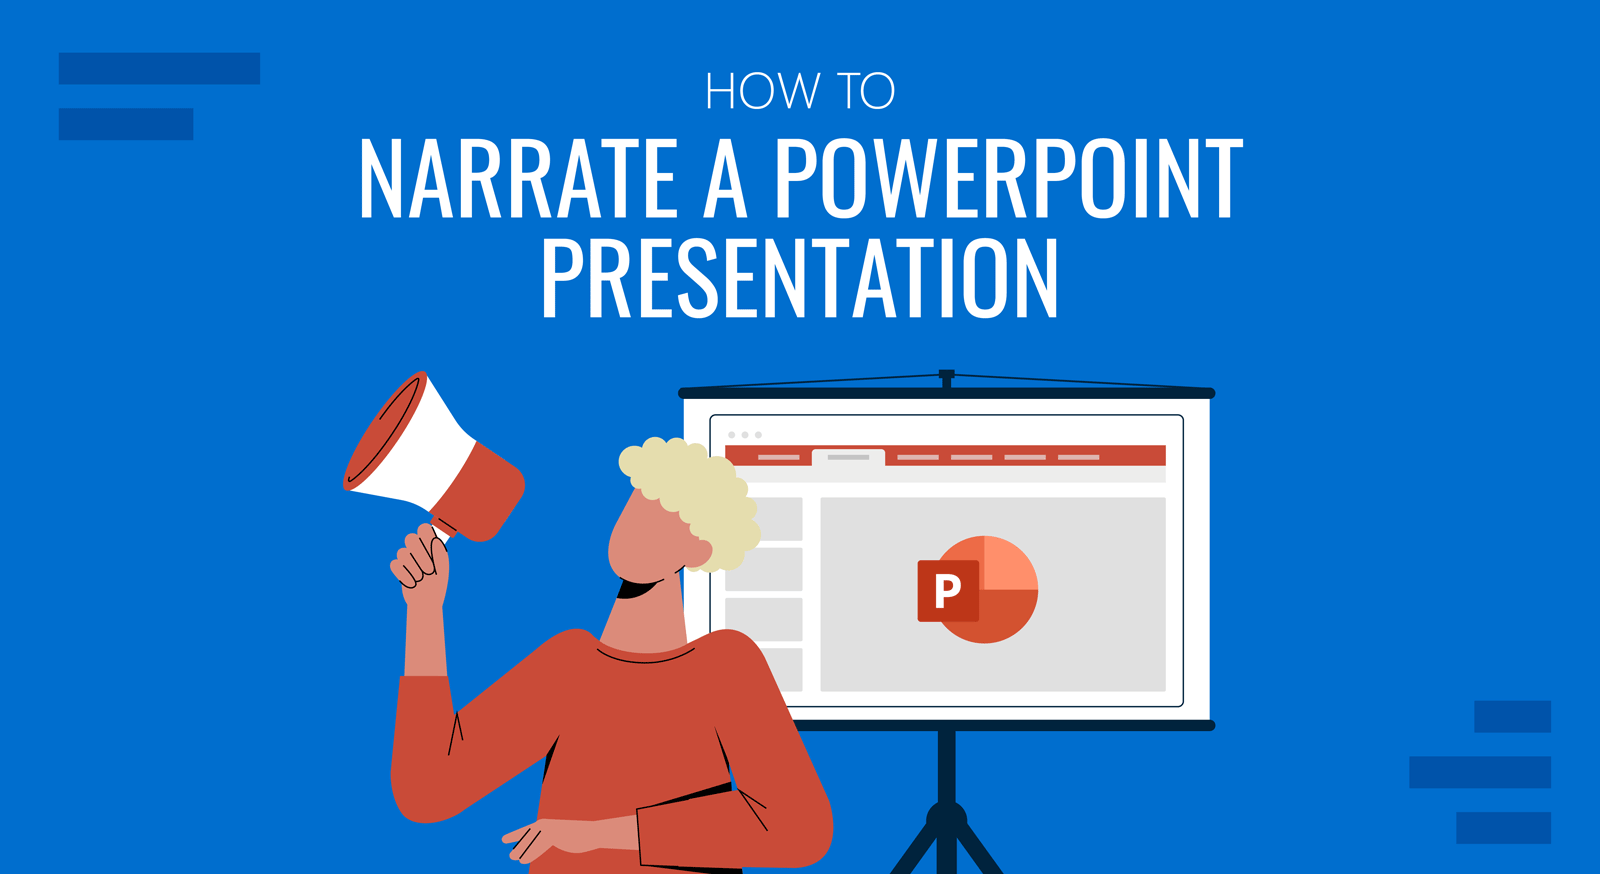 a narrated presentation in powerpoint is known as